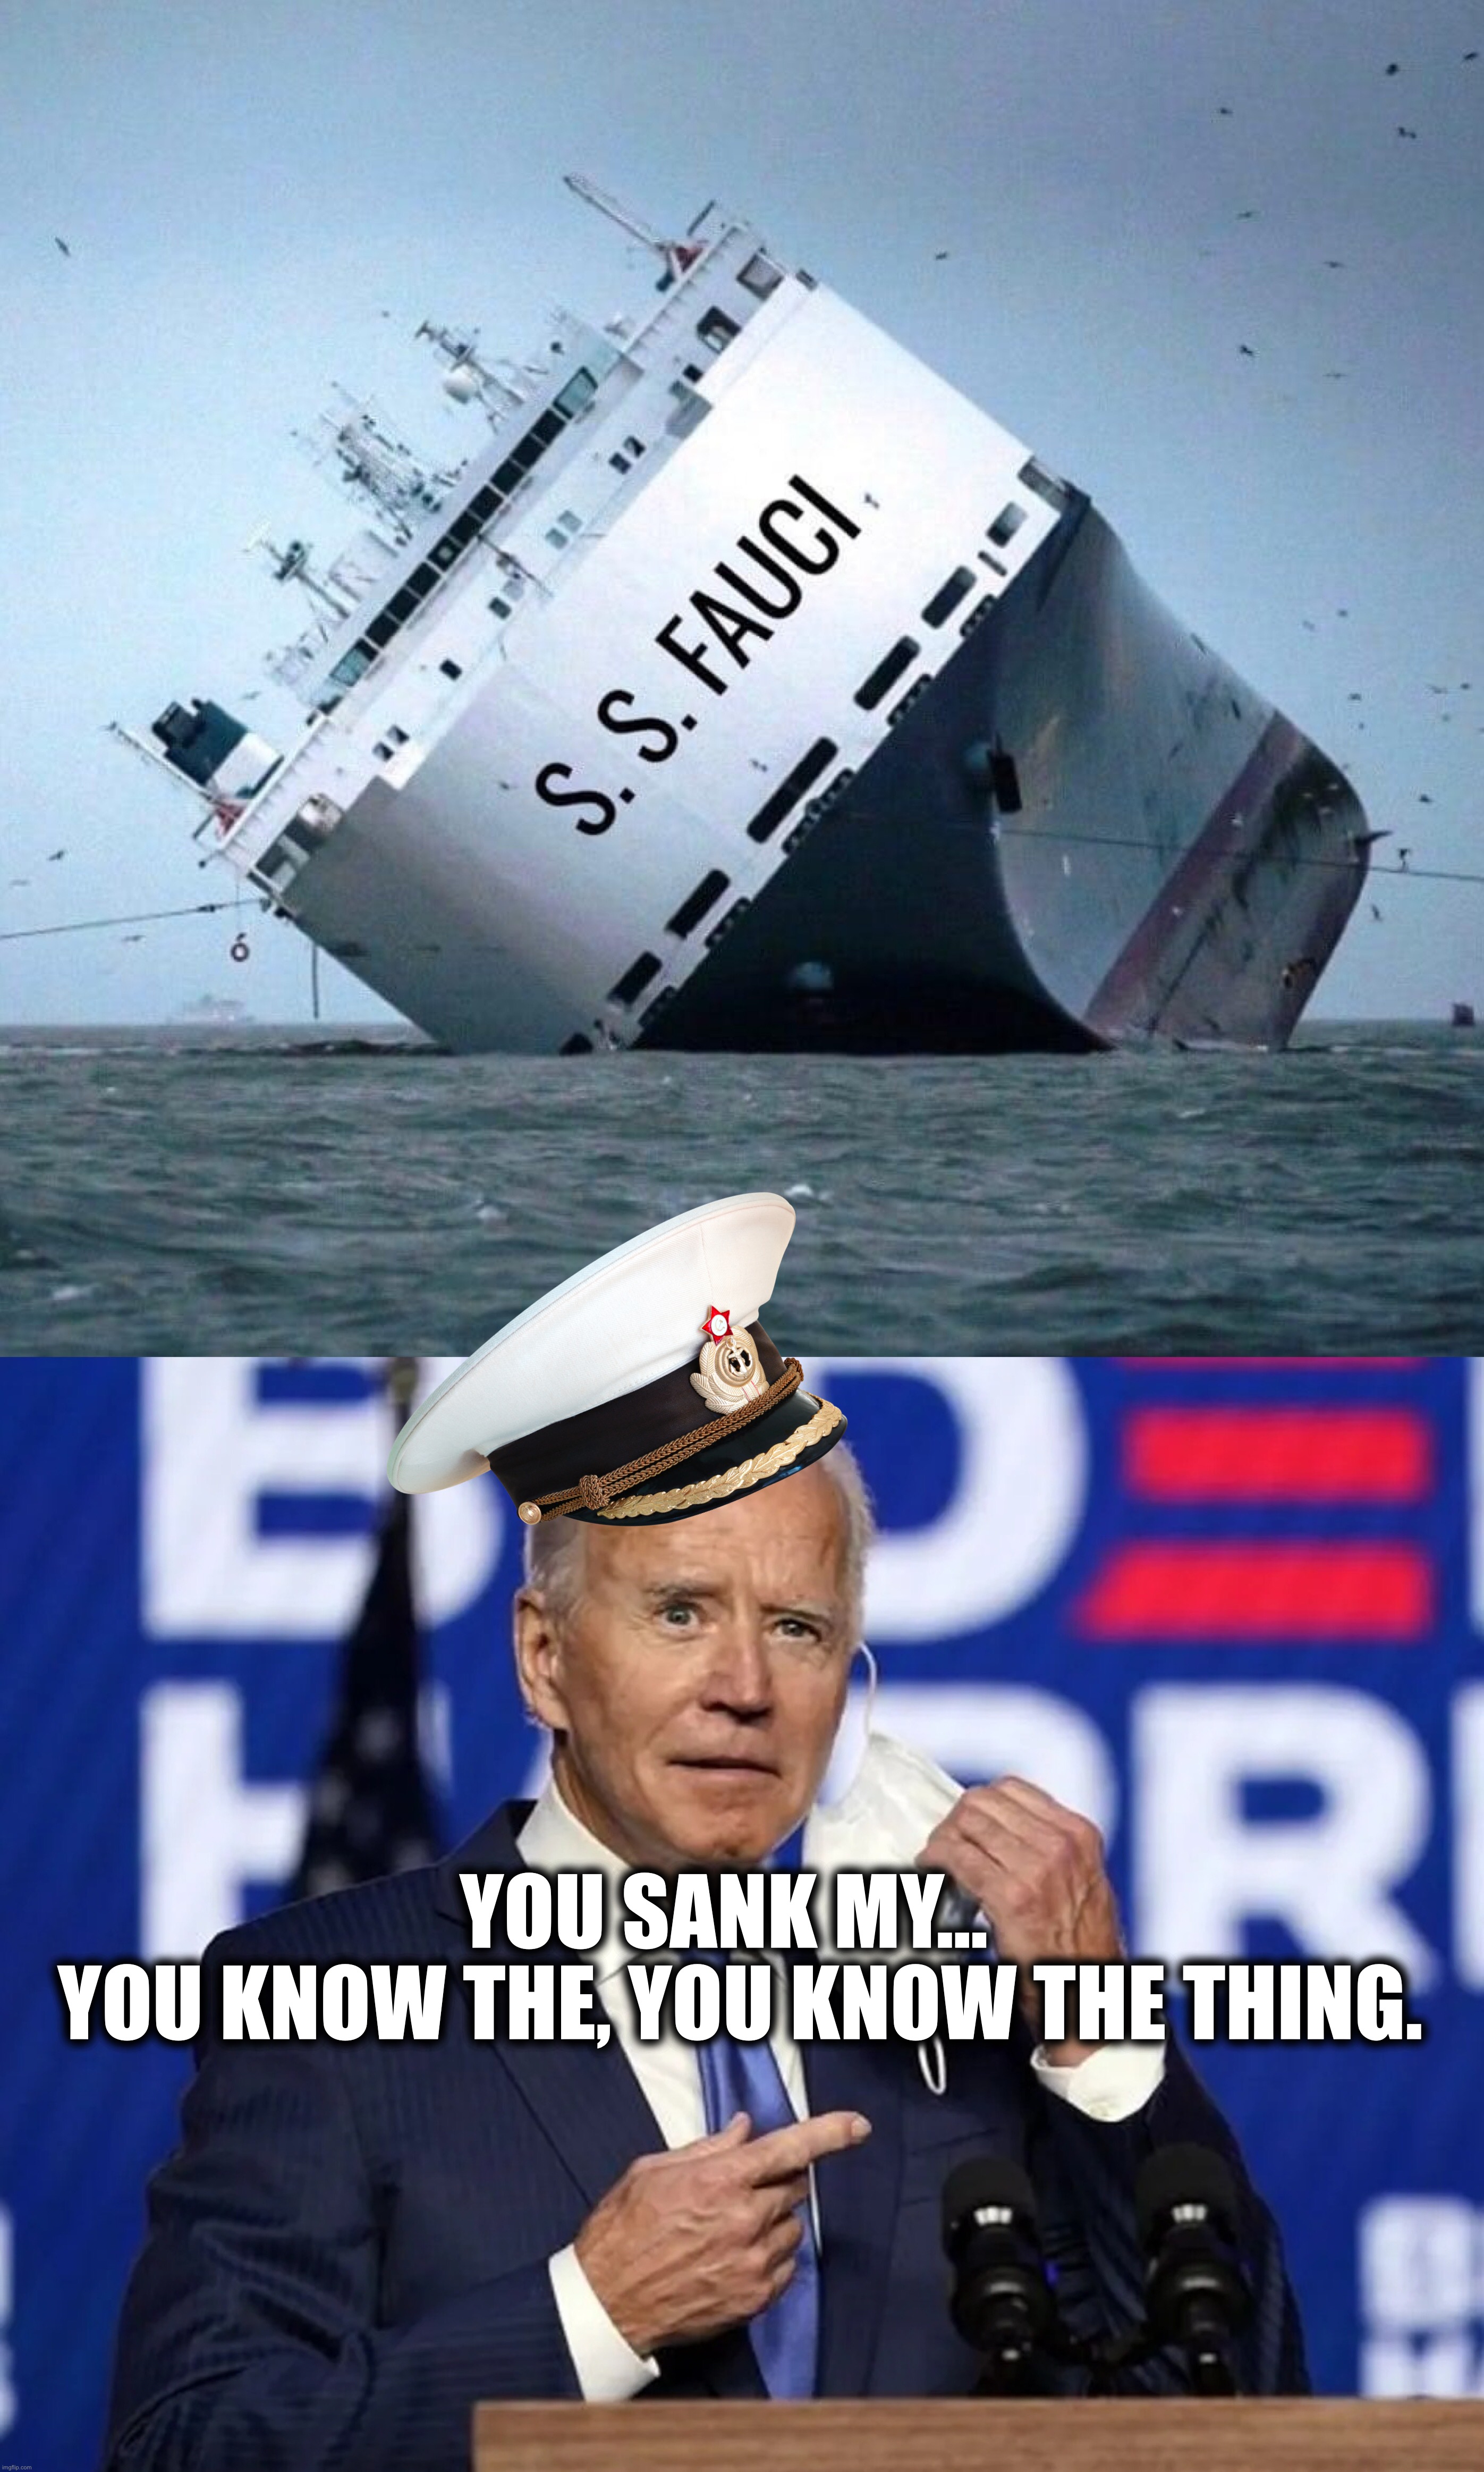 You sank my battleship… | YOU SANK MY…  
YOU KNOW THE, YOU KNOW THE THING. | image tagged in joe biden,dr fauci,fauci,covid-19,pandemic,fraud | made w/ Imgflip meme maker